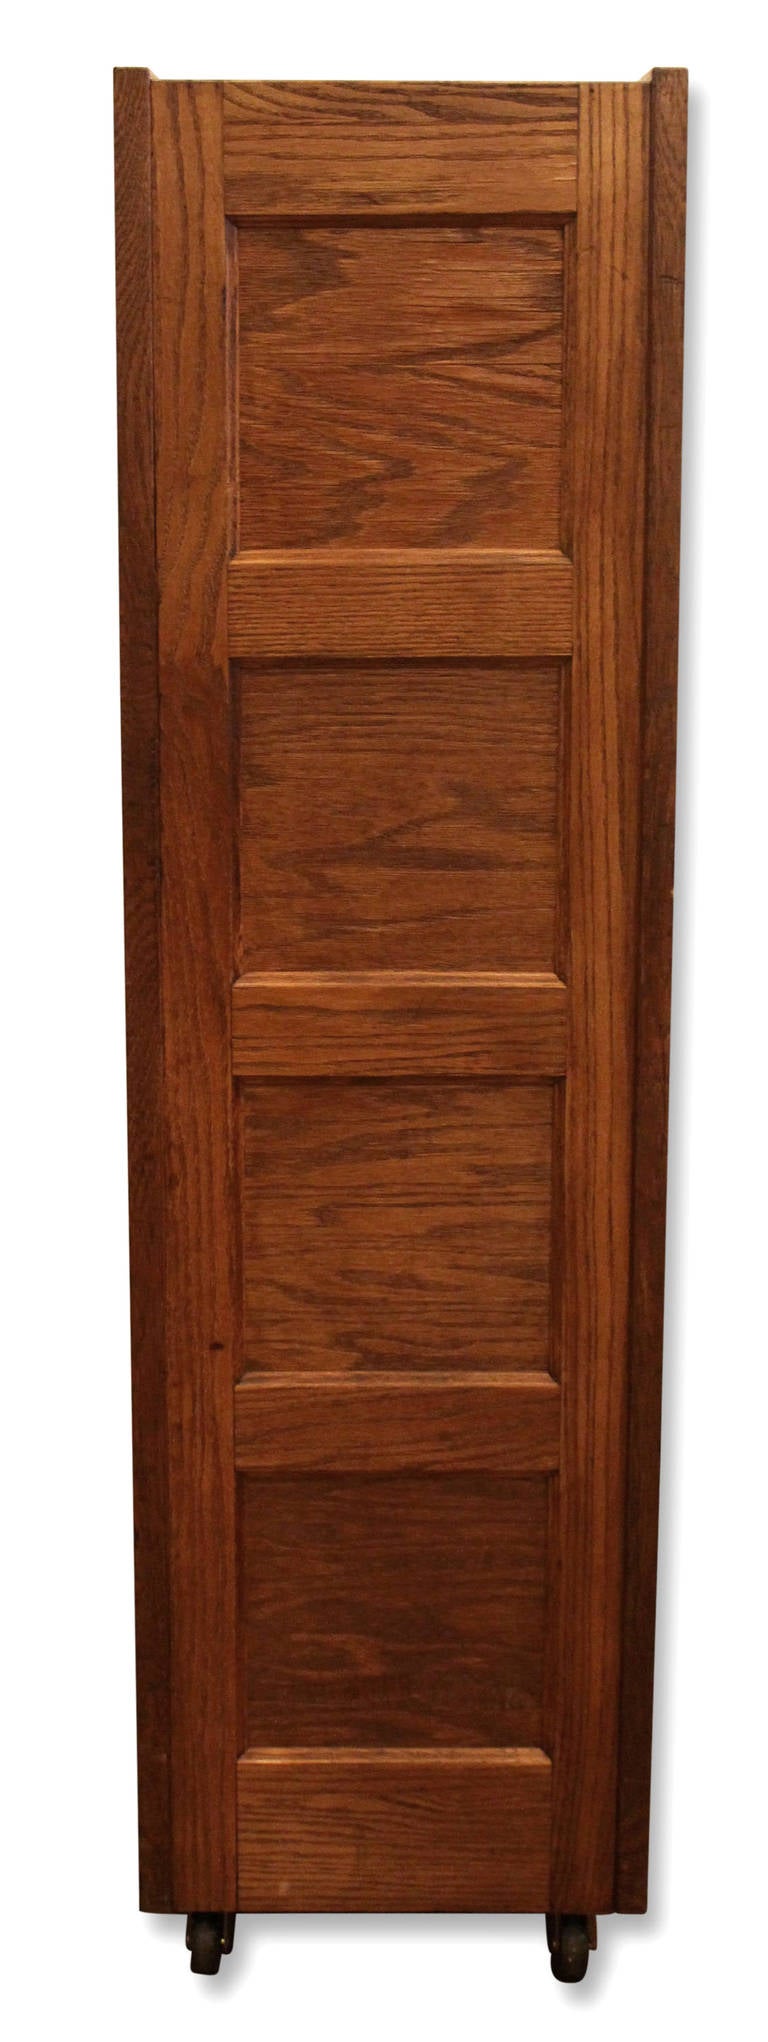 Mid-20th Century Antique Quartersawn Oak Library Cabinet with Sixteen Drawers in Mint Condition